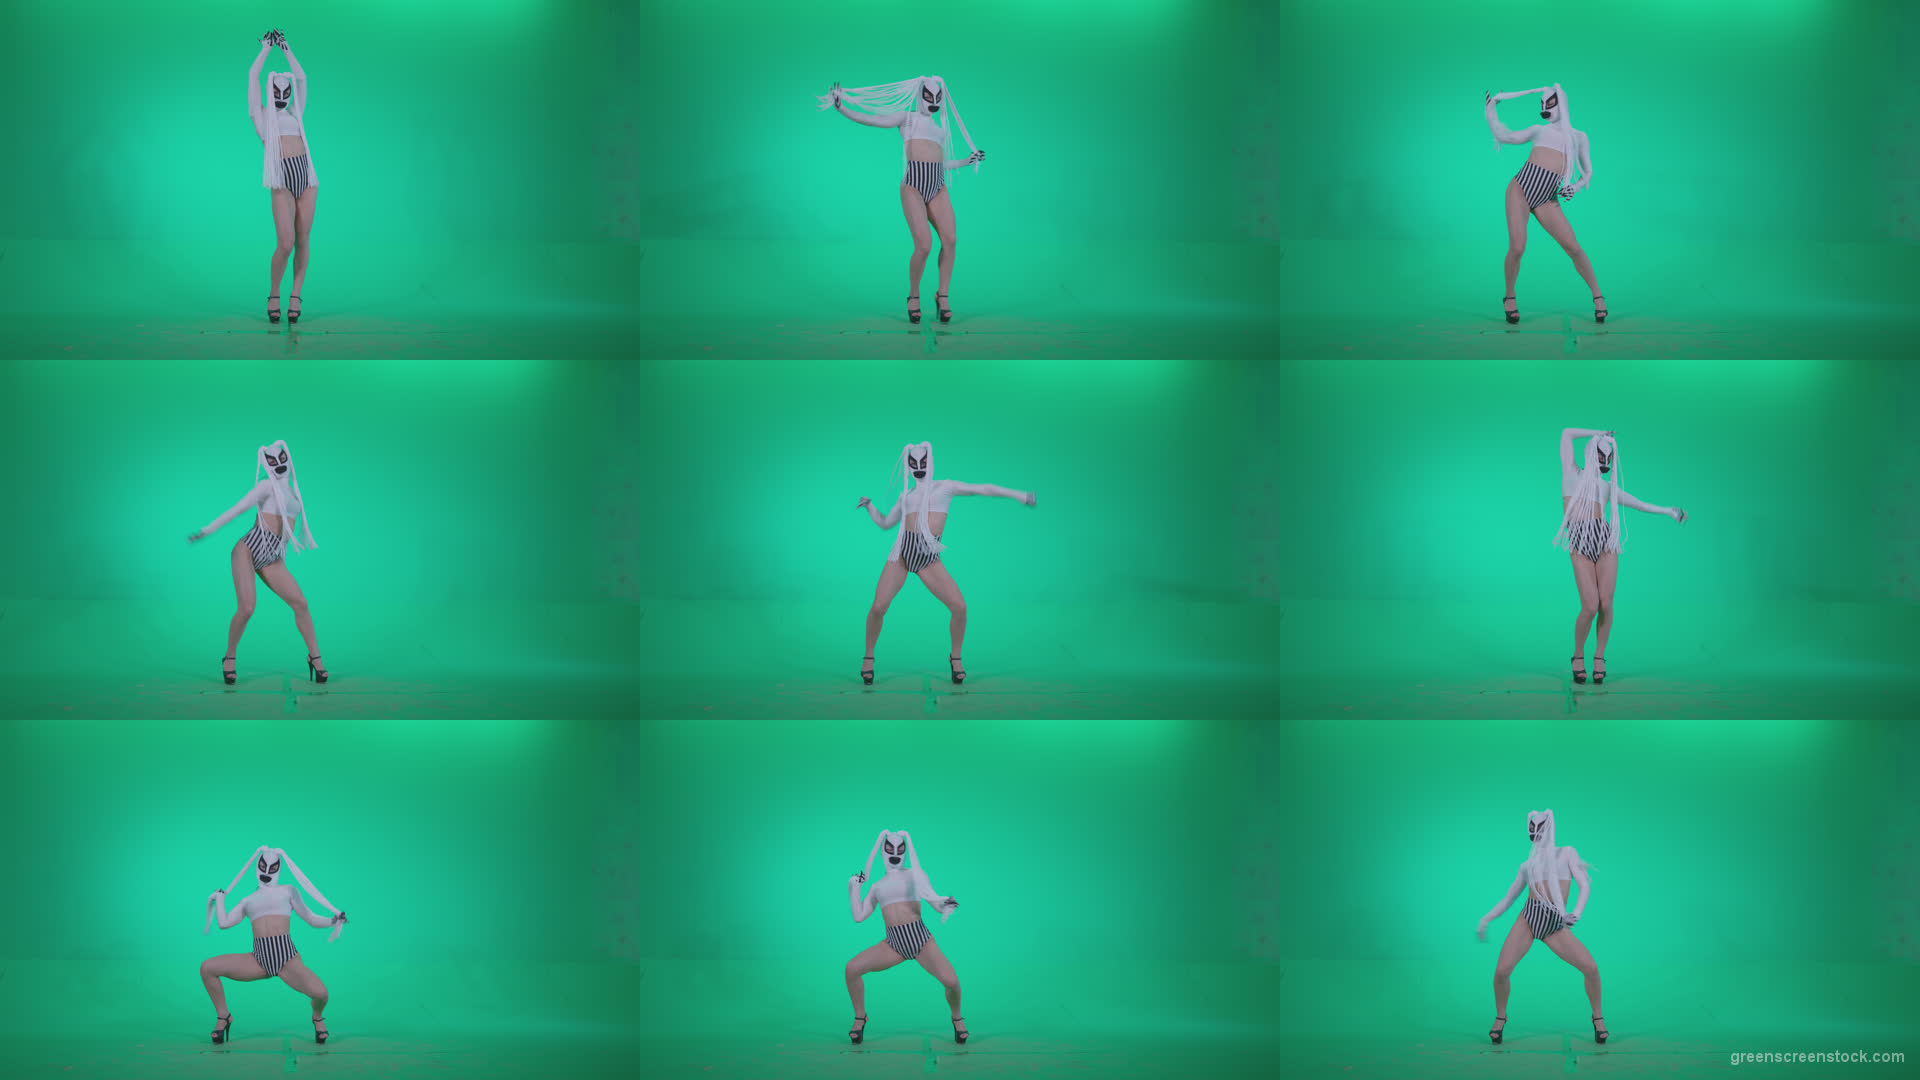 Go-go-Dancer-with-Latex-Top-t1-Green-Screen-Video-Footage Green Screen Stock